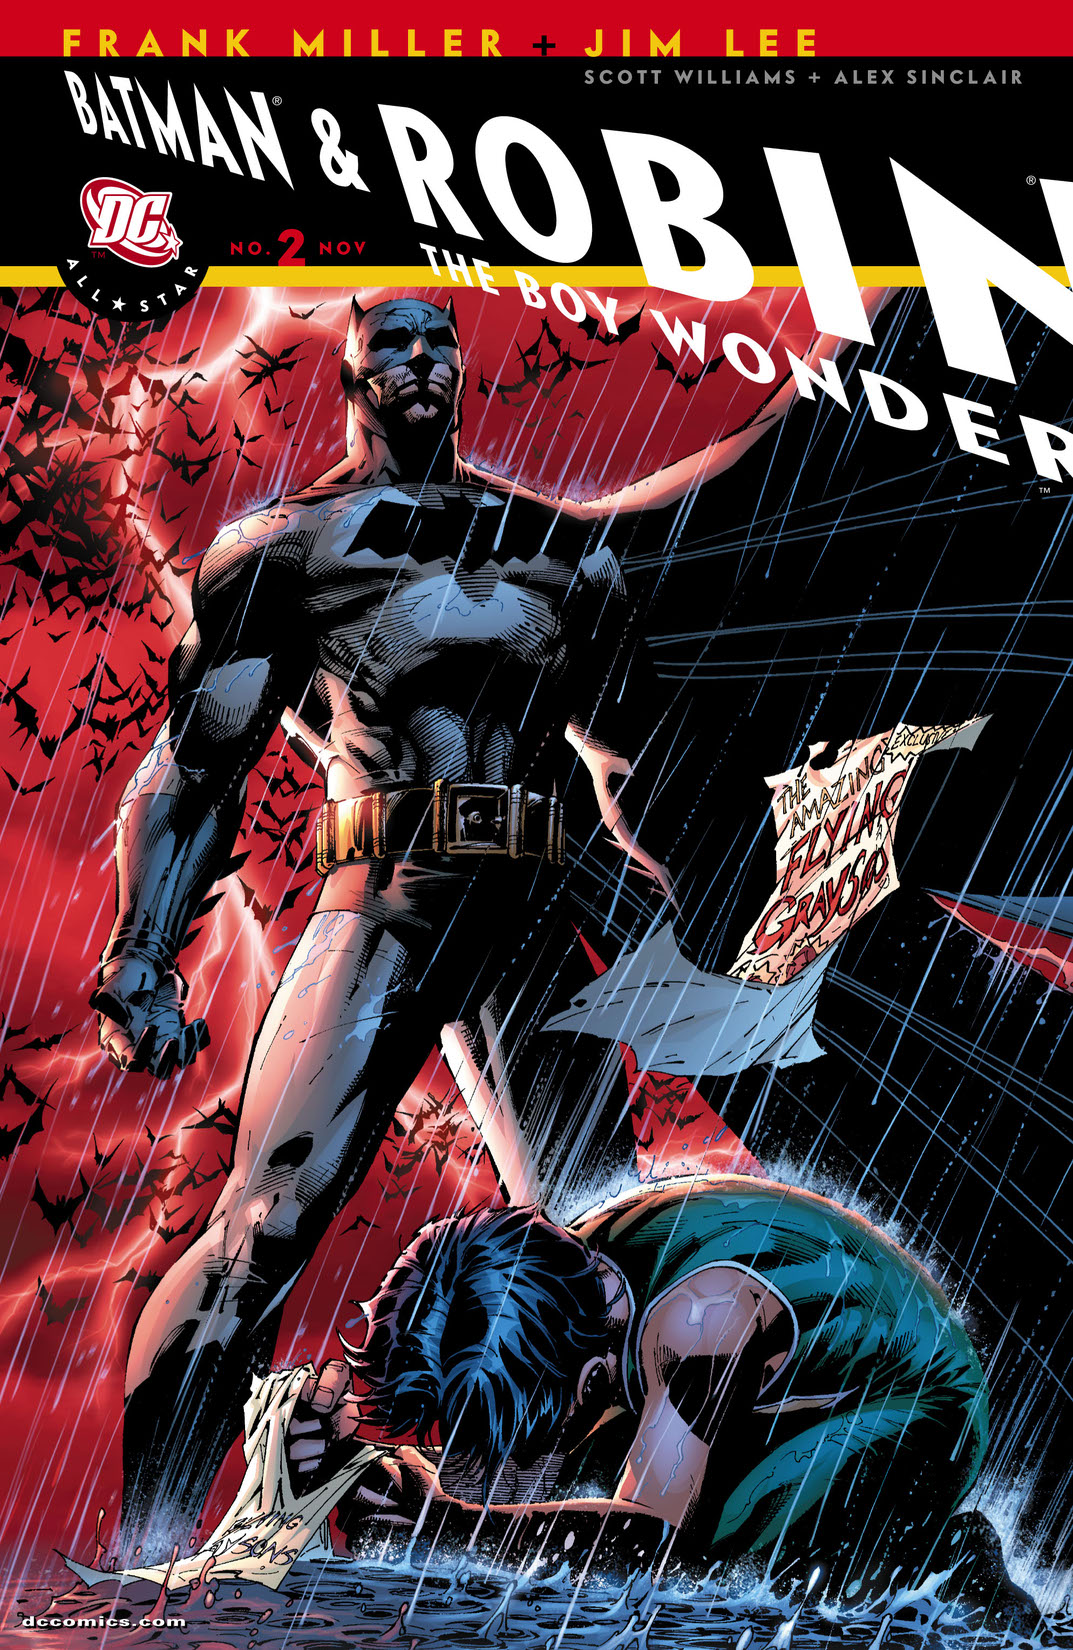 All-Star Batman & Robin, The Boy Wonder #2 preview images